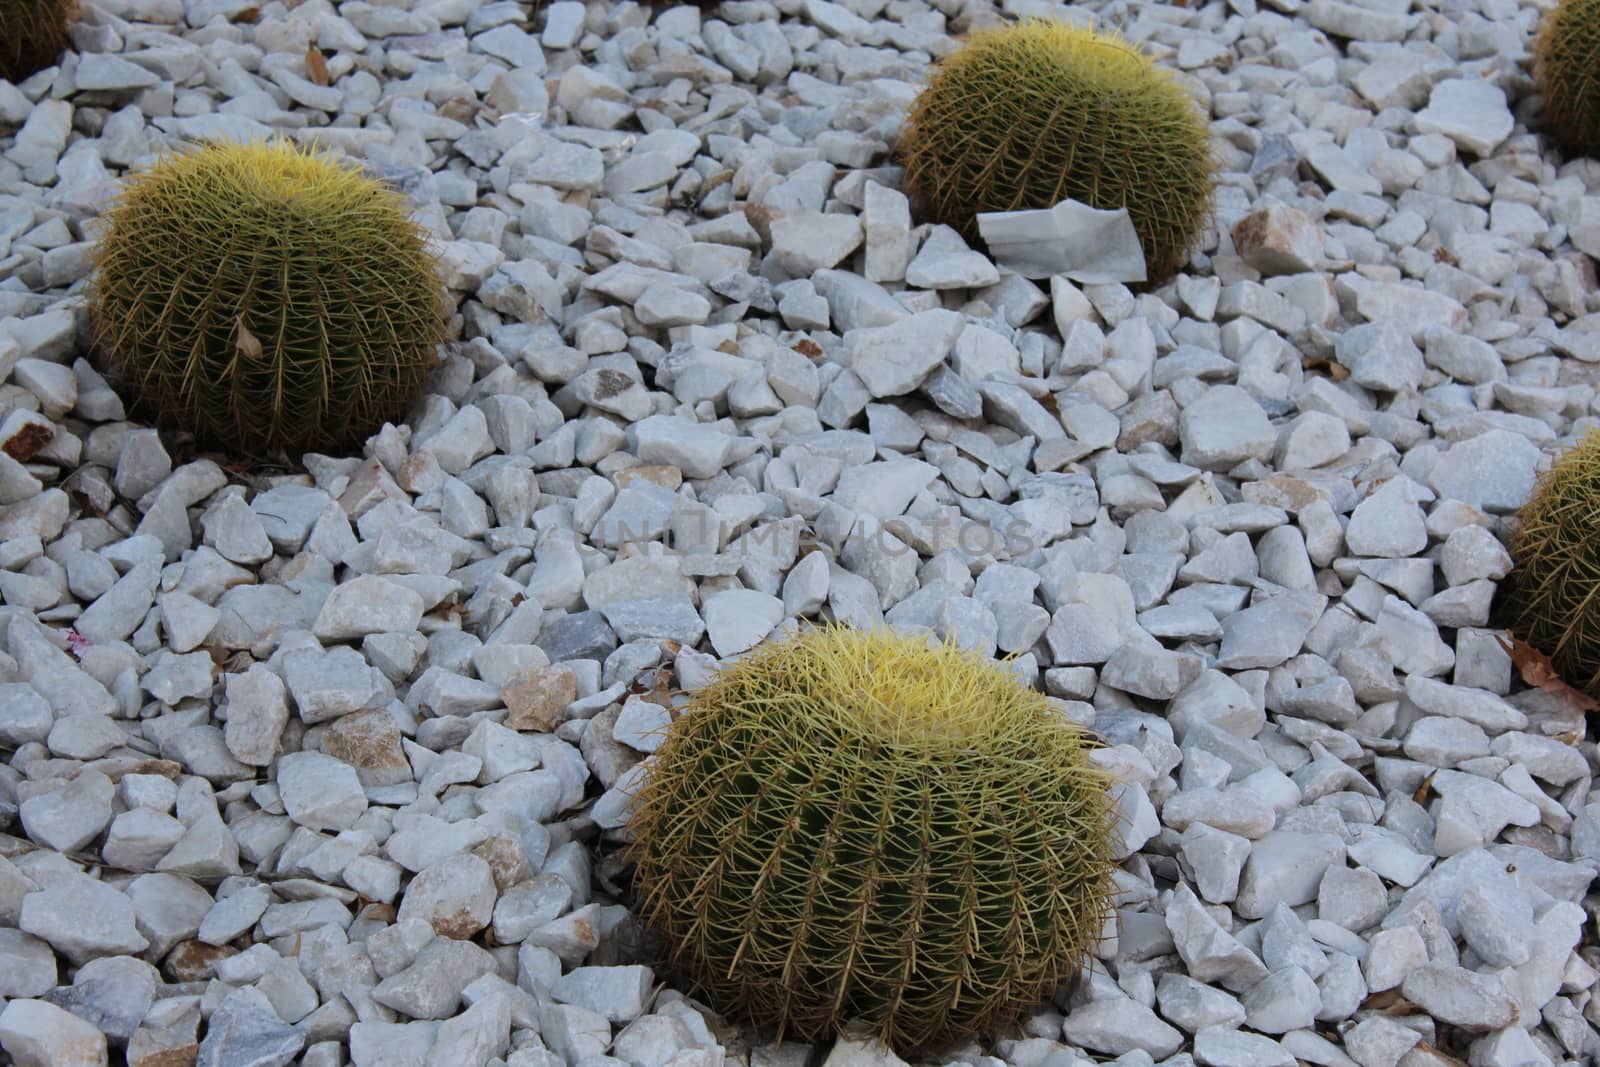 Cacti, with the common name Golden Barrel Cactus or Golden Ball Cactus (species name: Echinocactus grusonii).